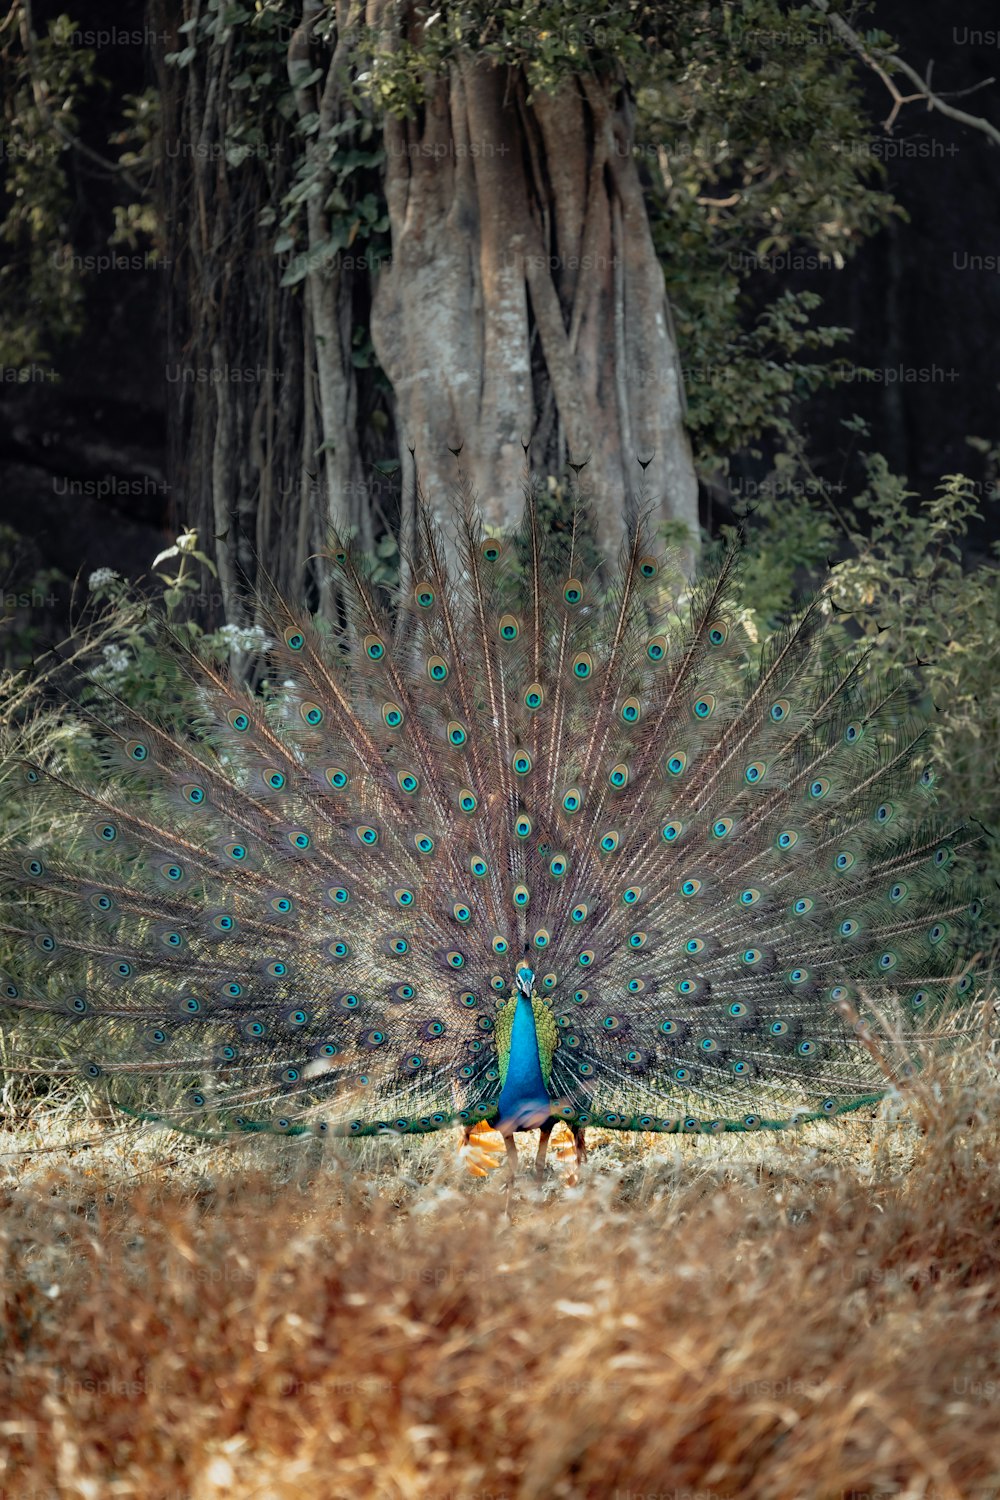 a peacock displaying its feathers in front of a tree